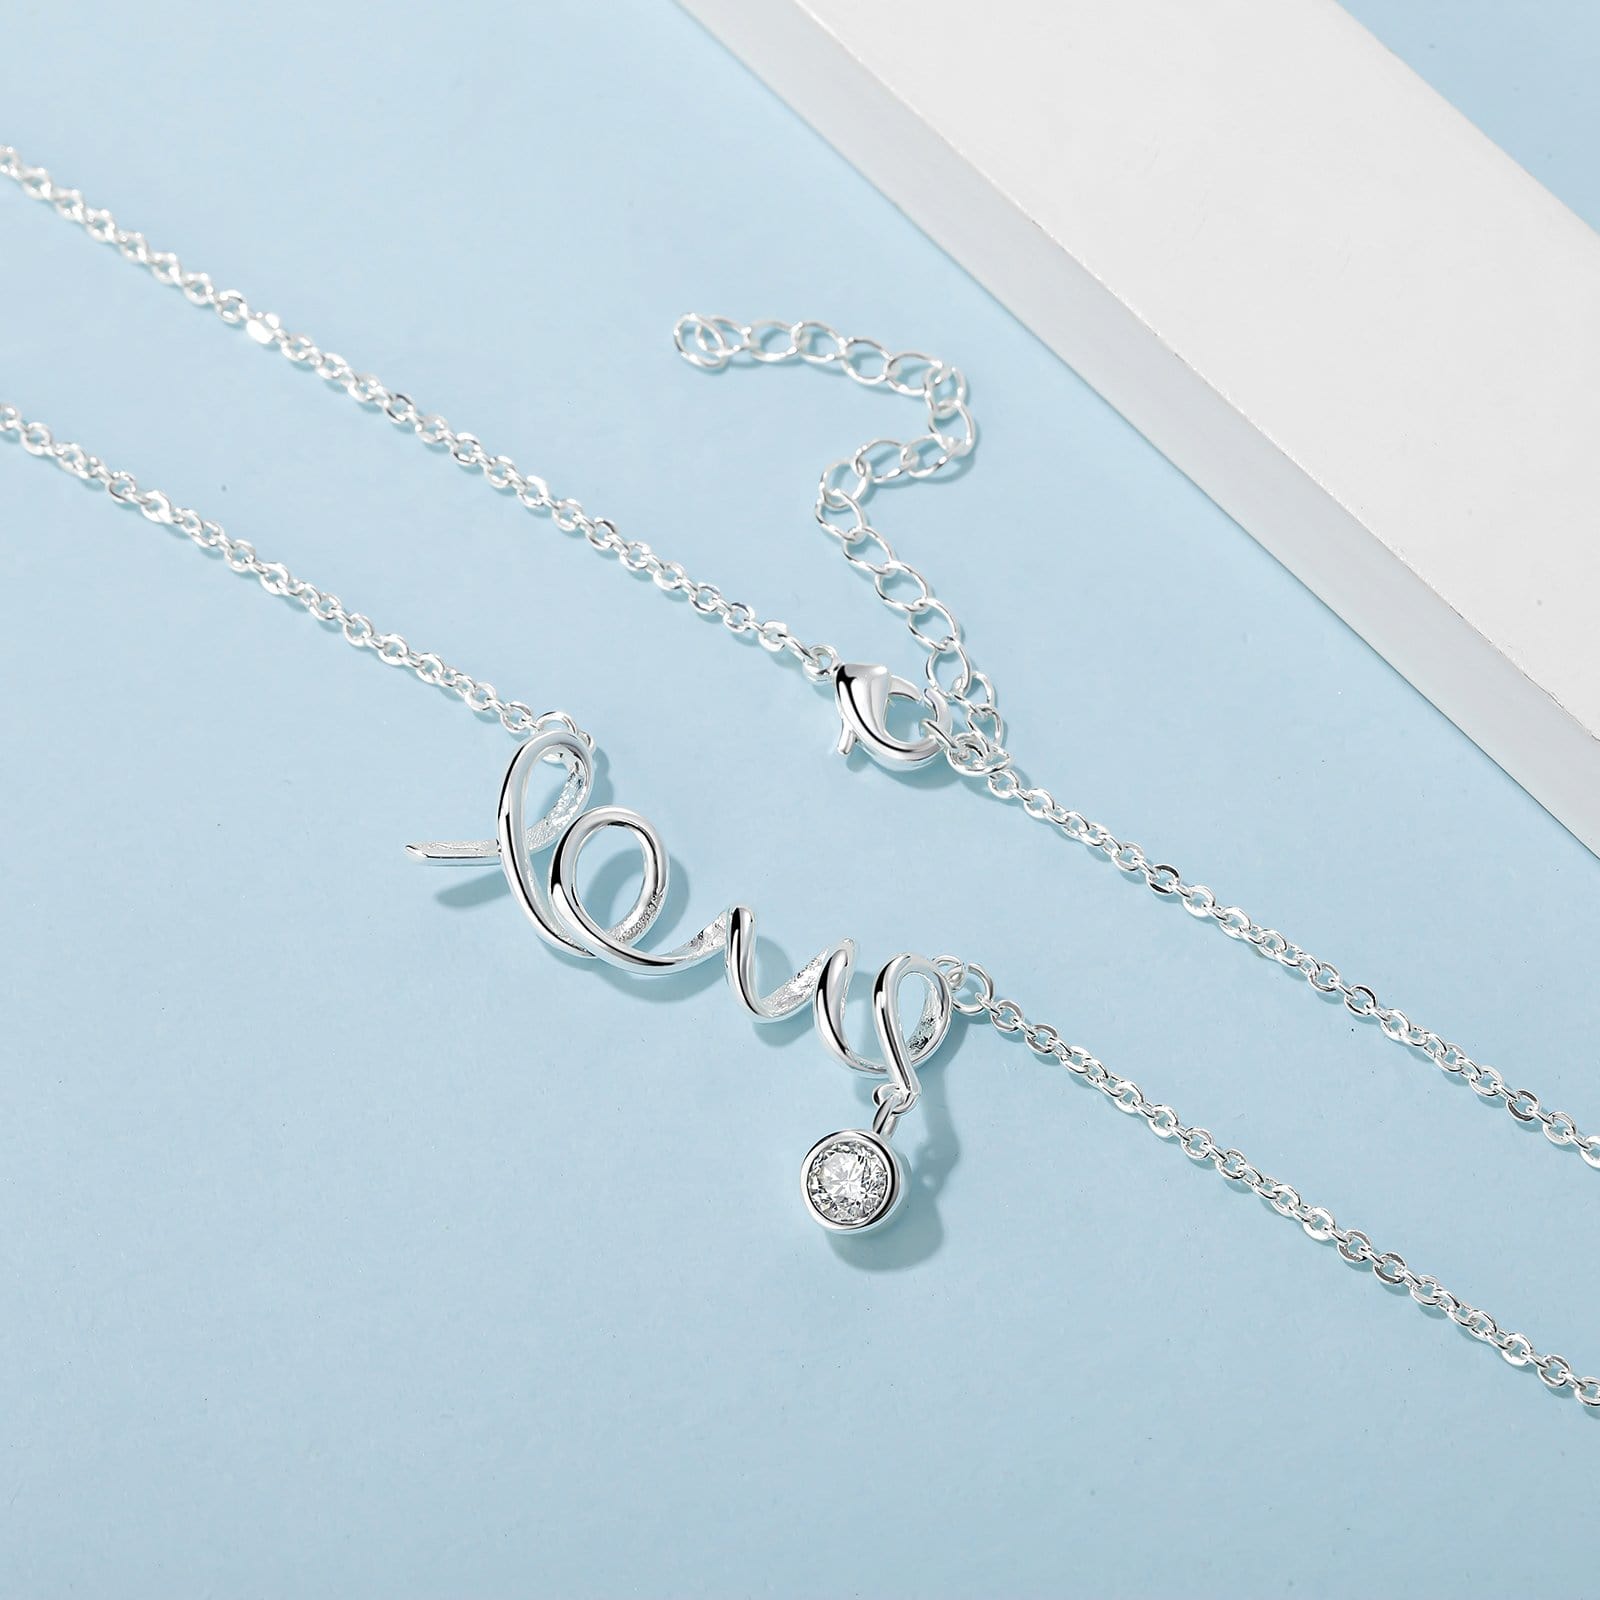 Necklaces To My Mom - Forever Thankful Love Pendant Necklace GiveMe-Gifts